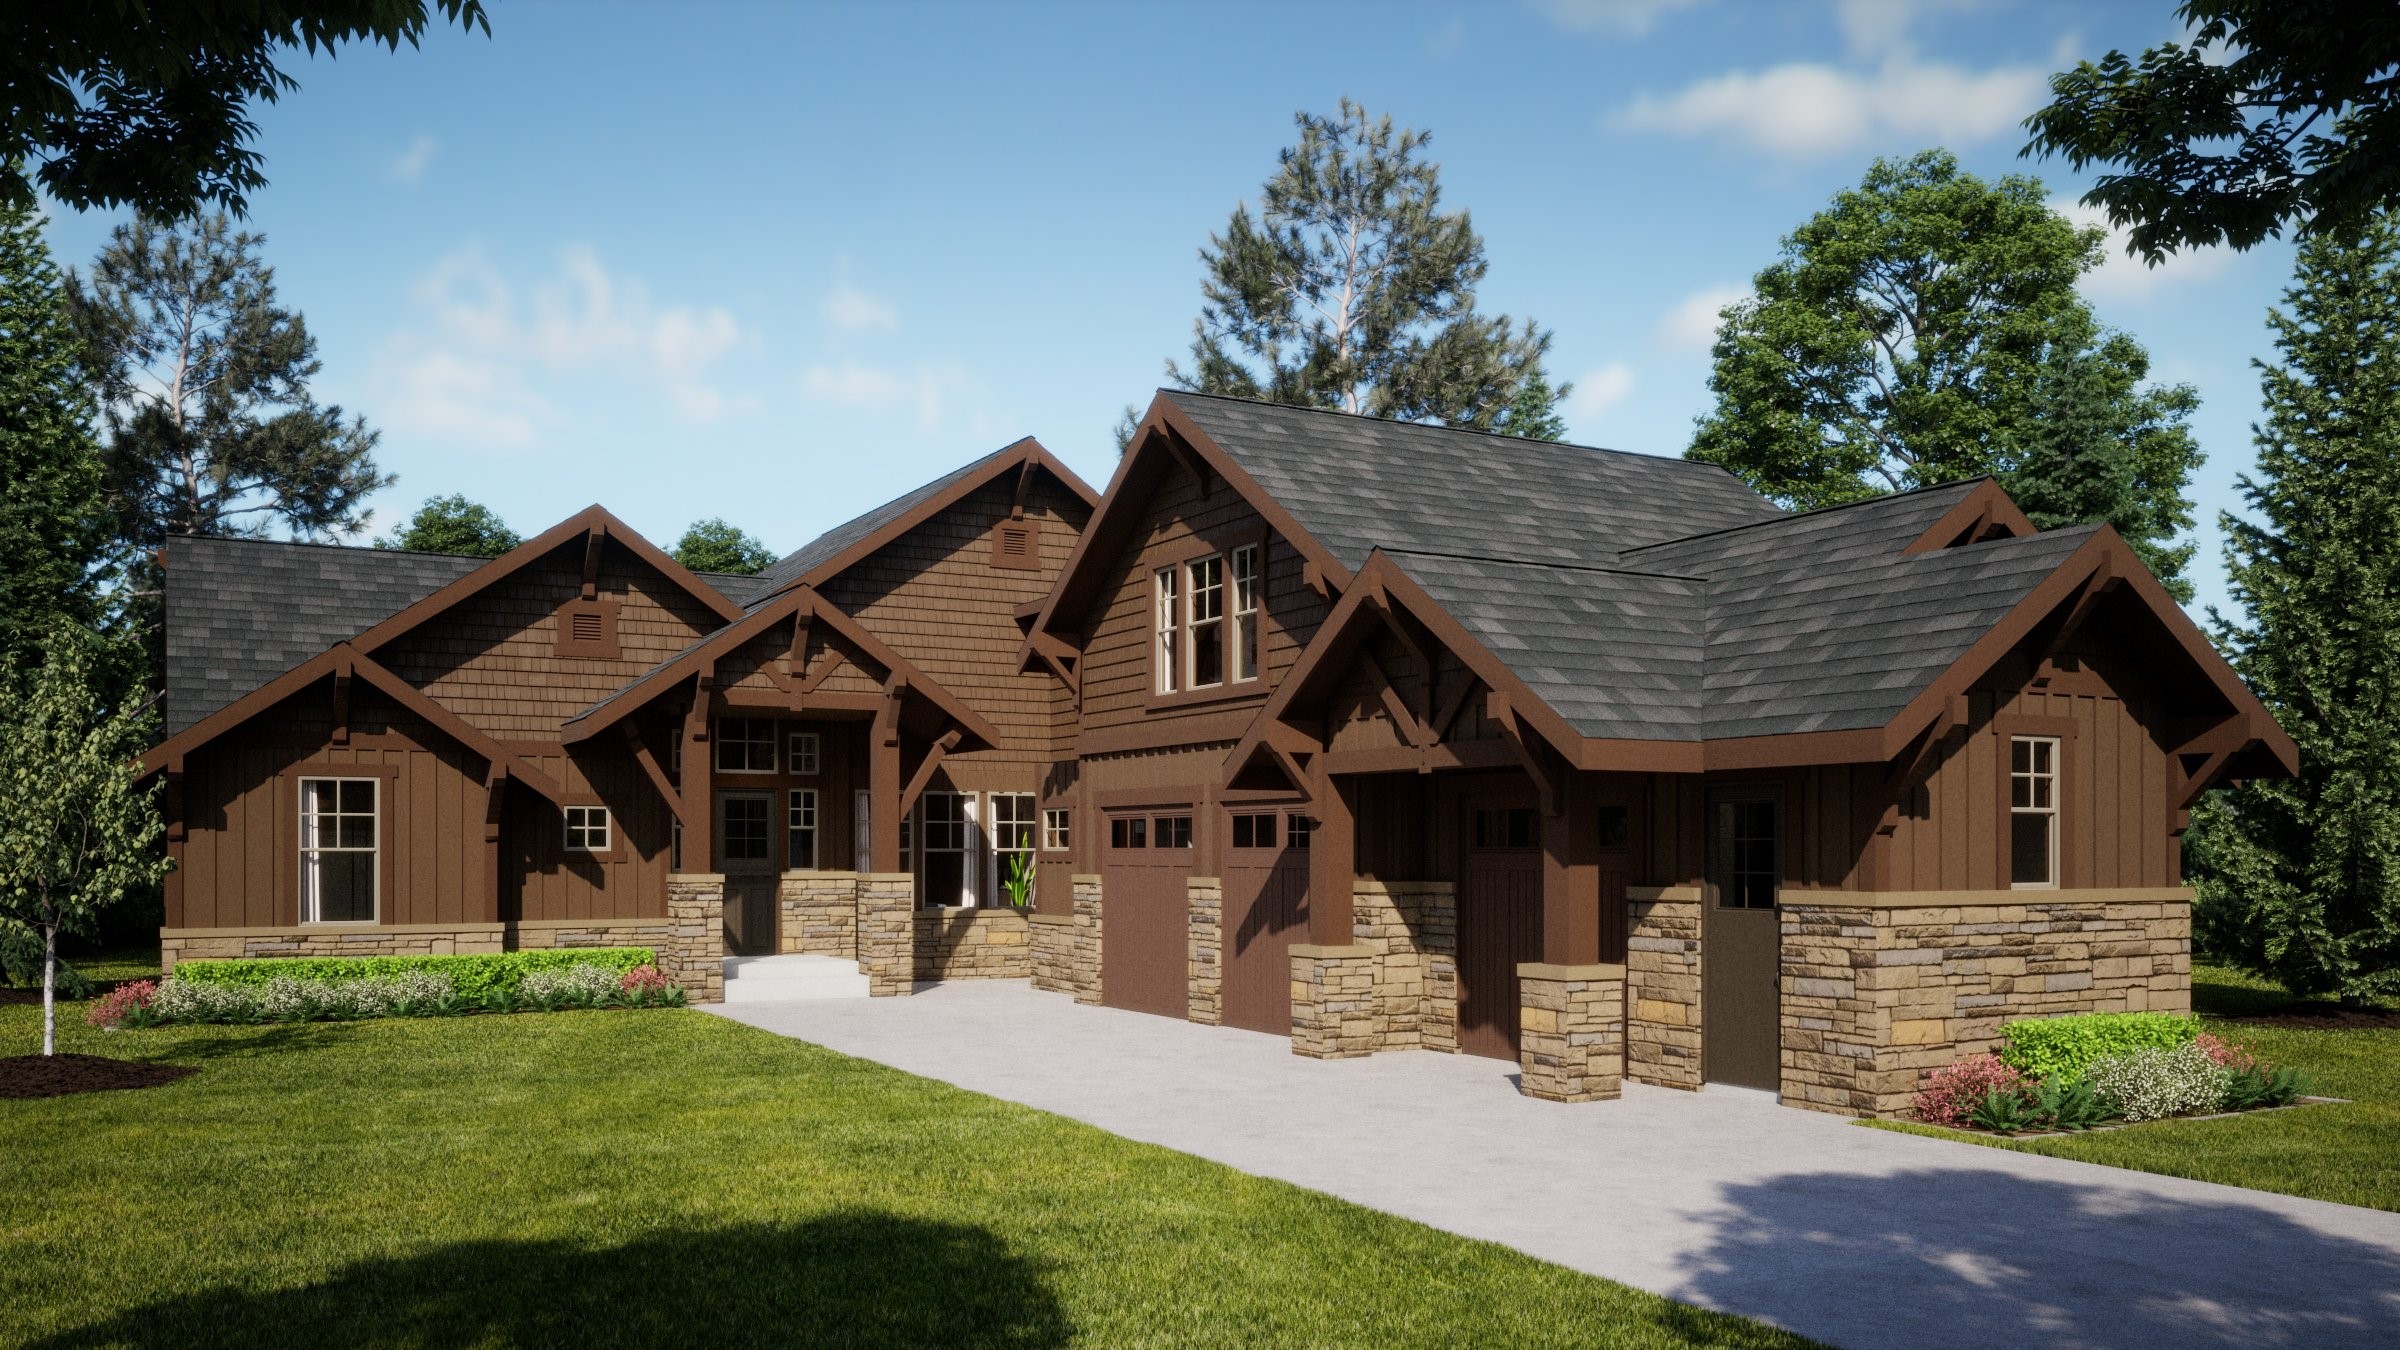 Sawyer Homes - Carbon River exterior home rendering